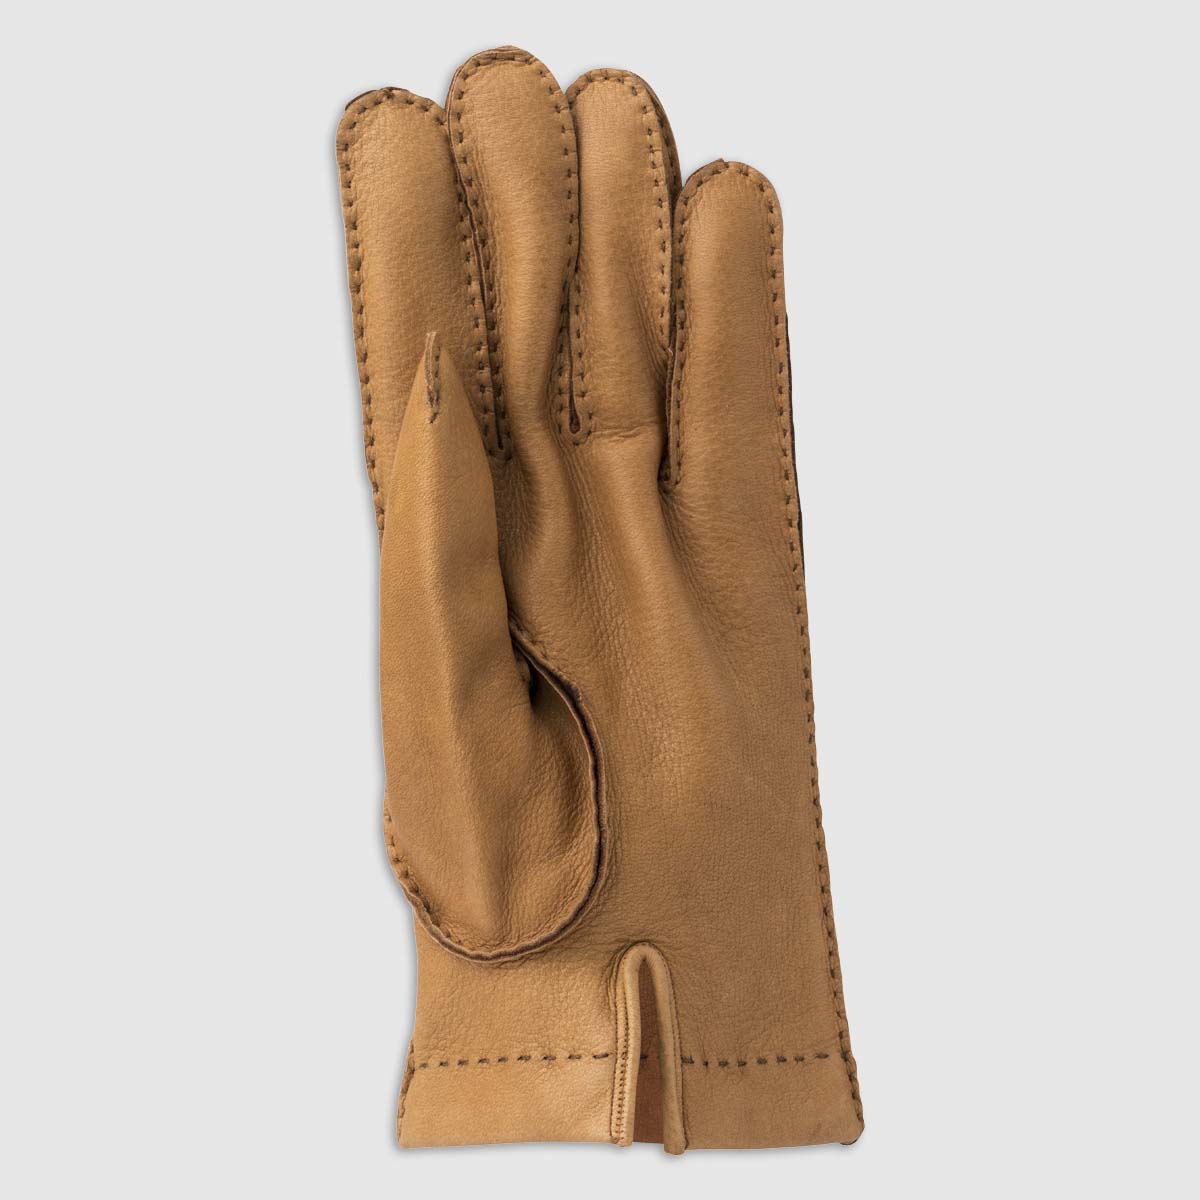 Hand Stitched Deer Leather Glove with Cashmere Lining Alpo Guanti on sale 2022 2